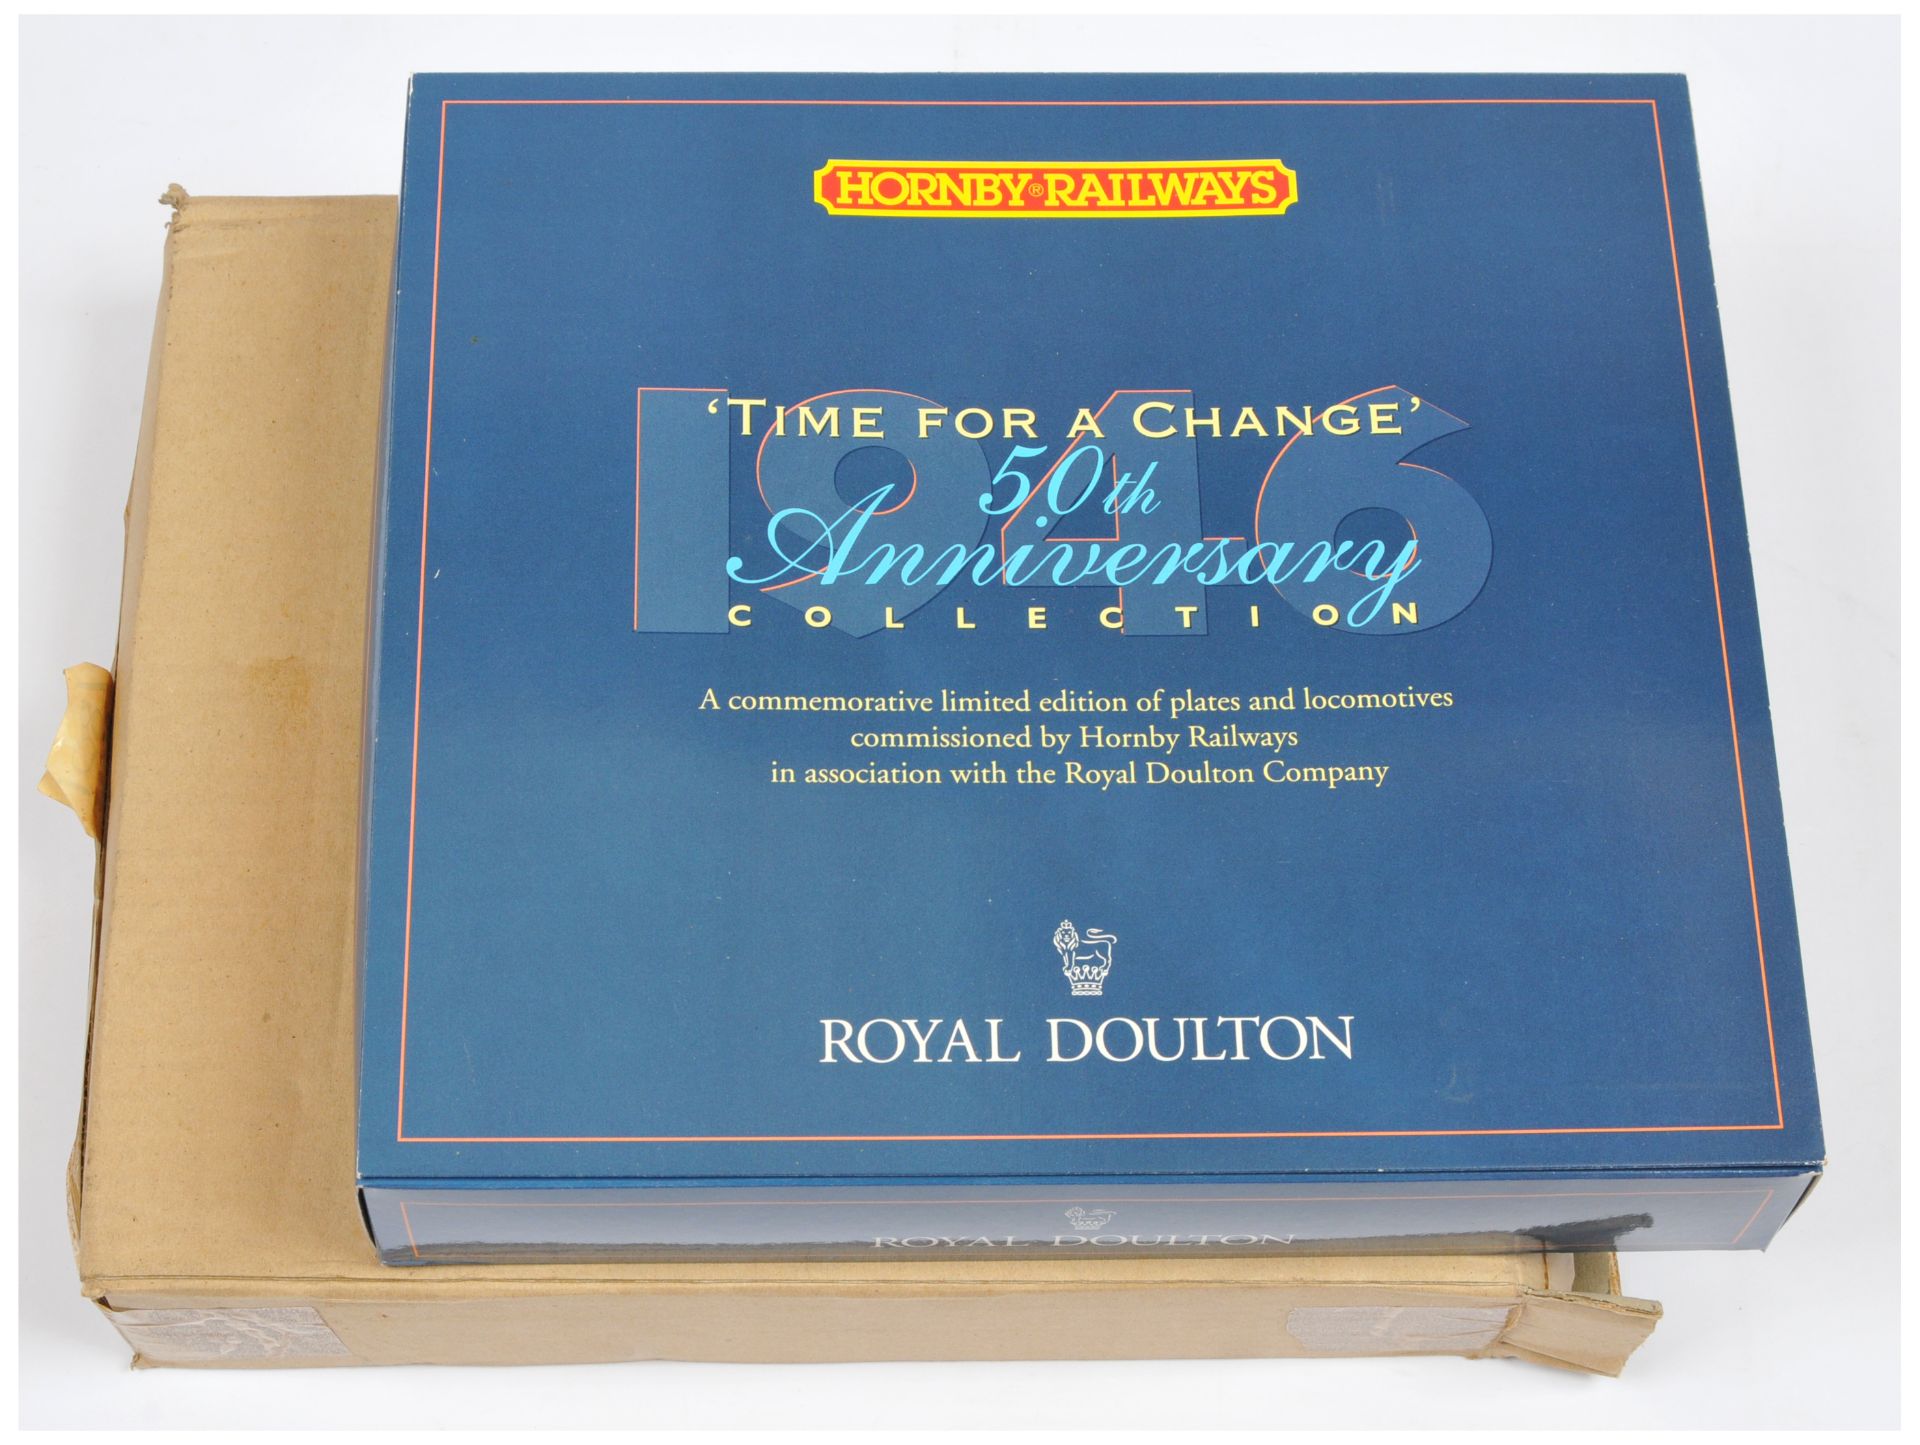 Hornby R648 (Limited Edition) "Time for a Change" 50th Anniversary presentation set 